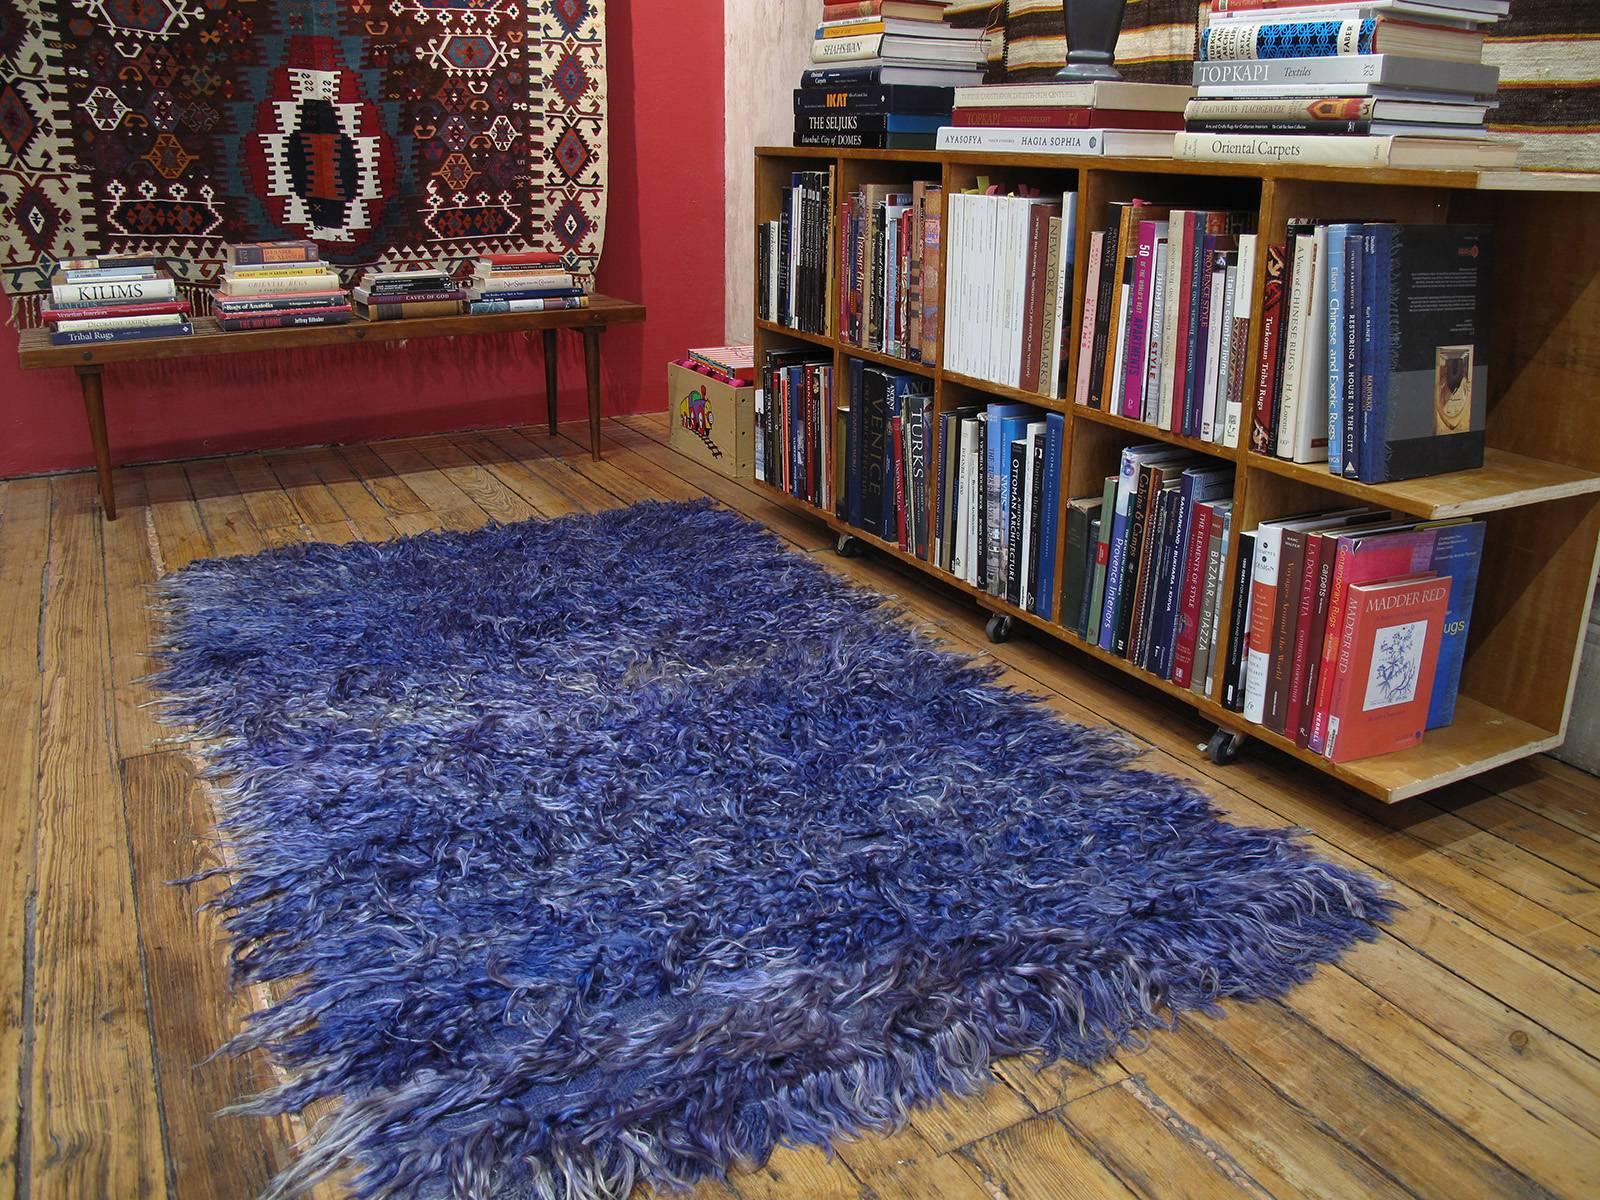 A lovely old shaggy rug from West-Central Turkey, knotted with long and loose strands of Angora goat hair (mohair), dip-dyed in violet-blue that has weathered very nicely with age. Such rugs were used to provide warmth and comfort in the weaver's